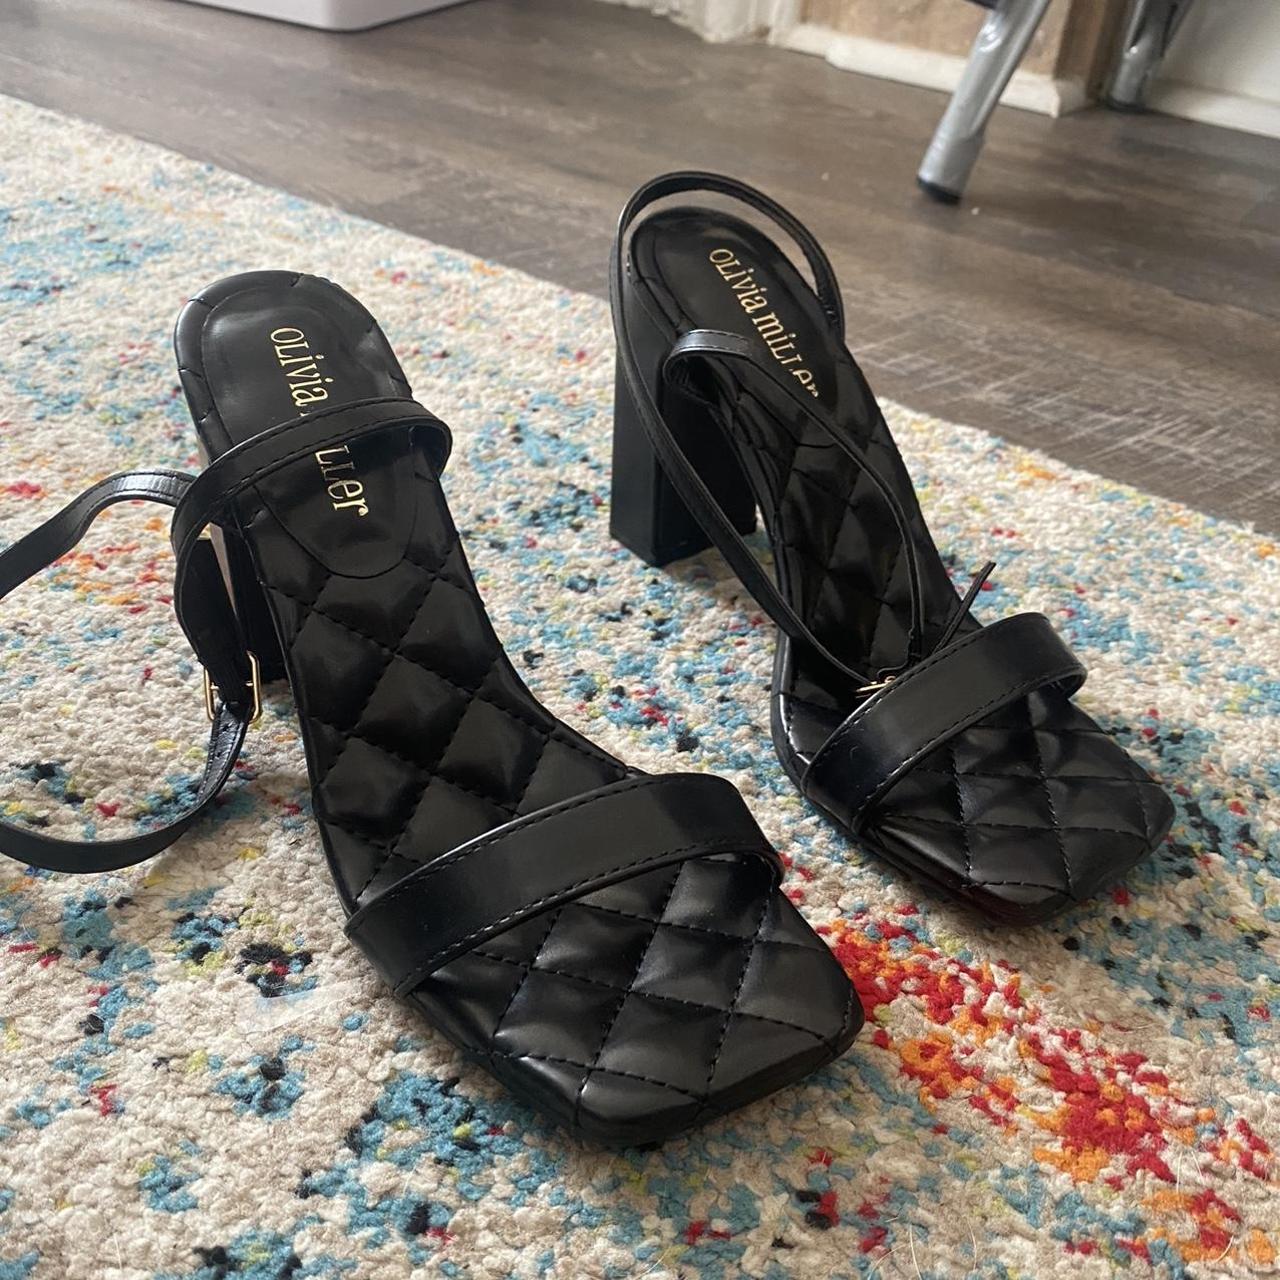 Chanel strappy black patent leather mid heel sandals - Depop